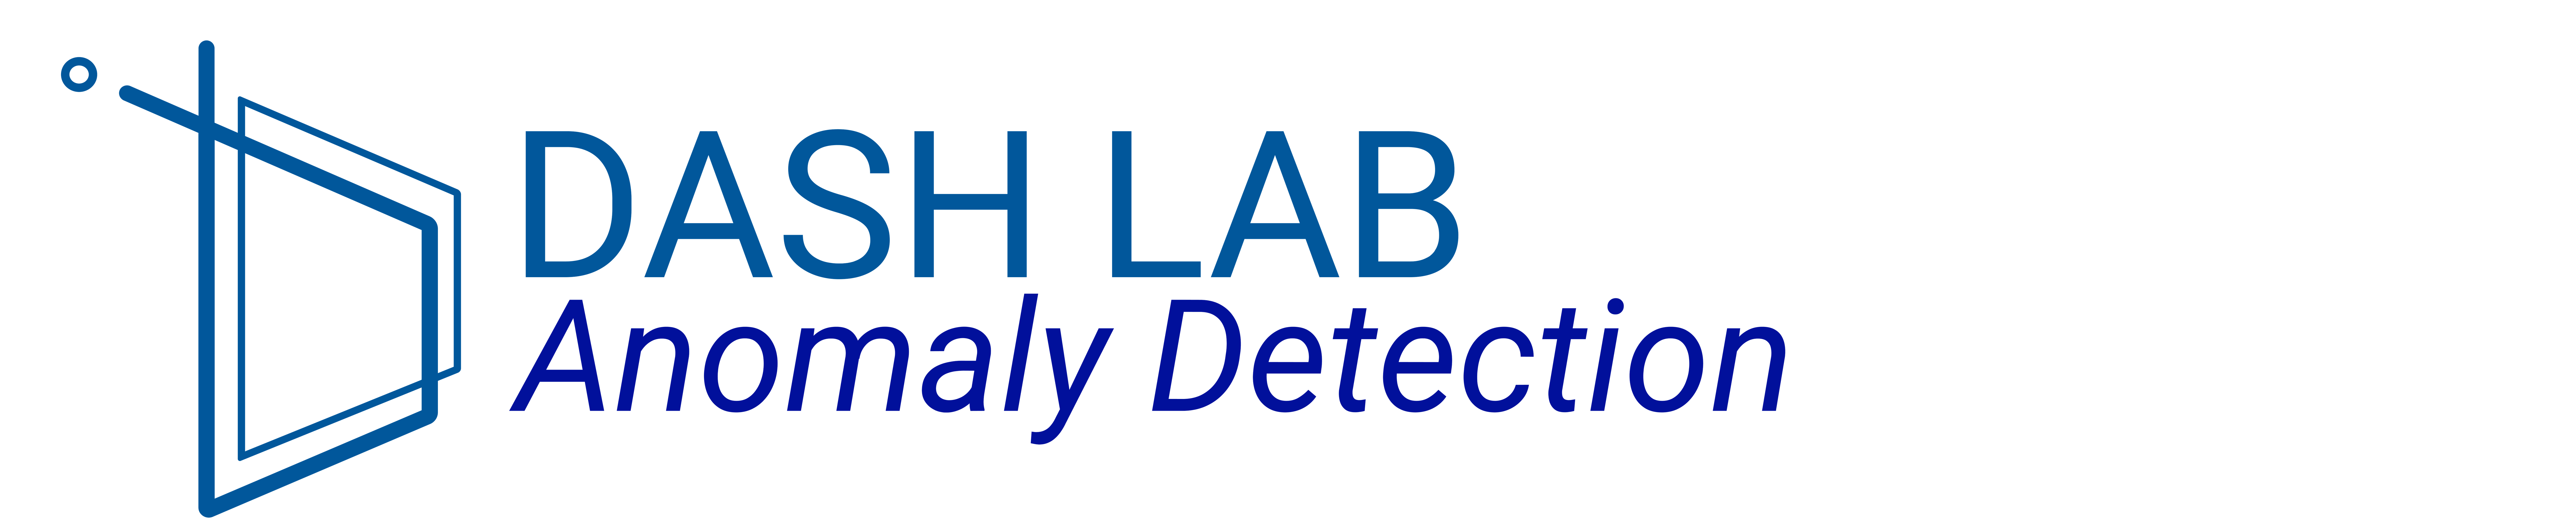 Anomlay detection from DASH Lab.png